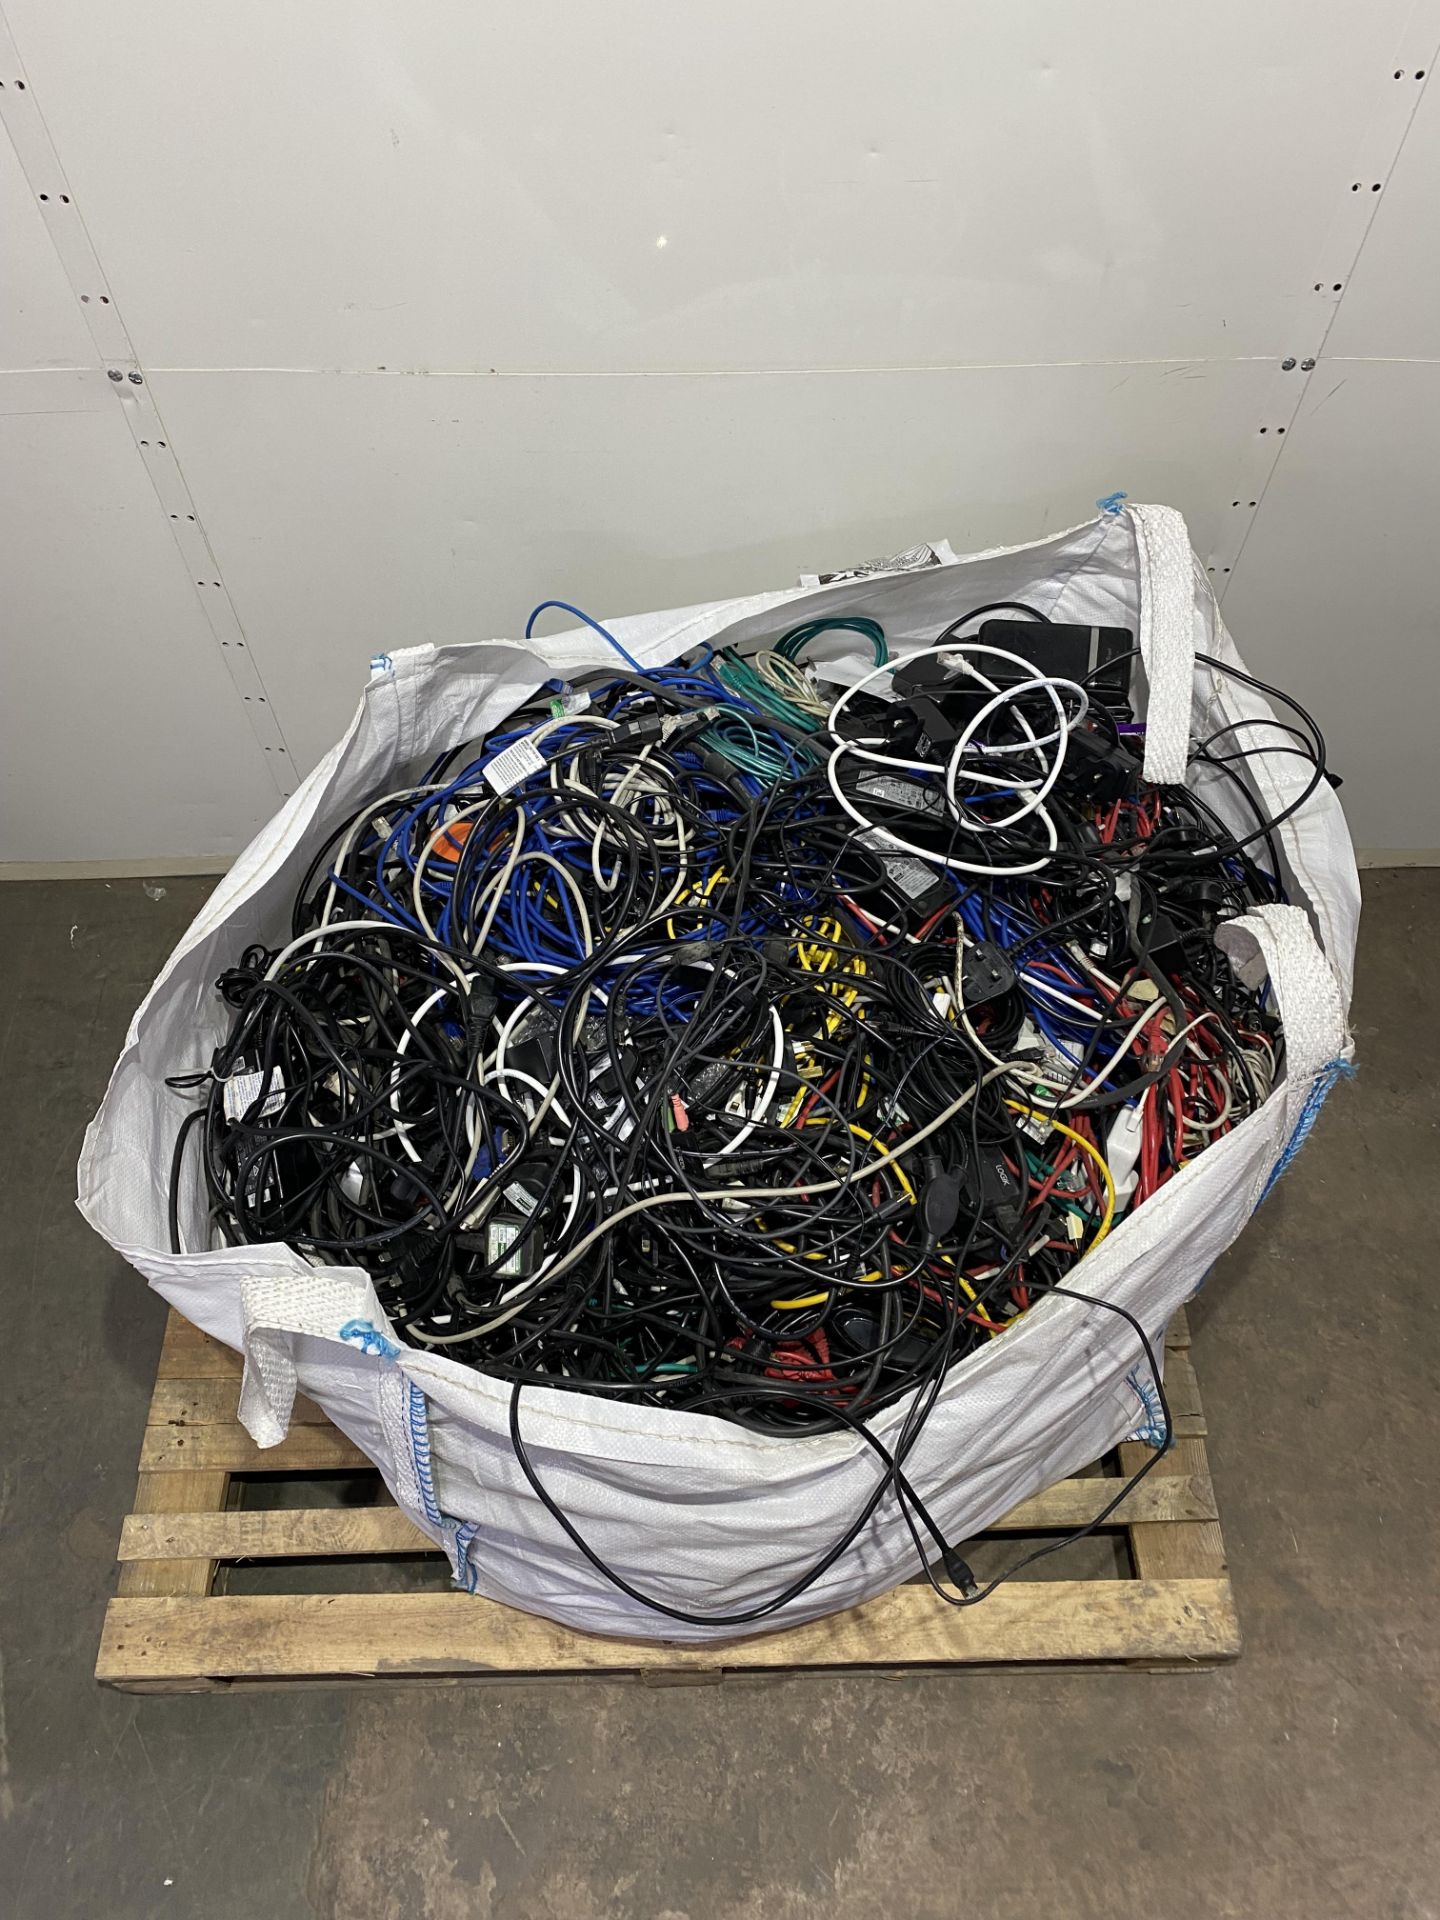 Large Quantity Of Various Electronic Wires, 140kg Bag - Image 3 of 12